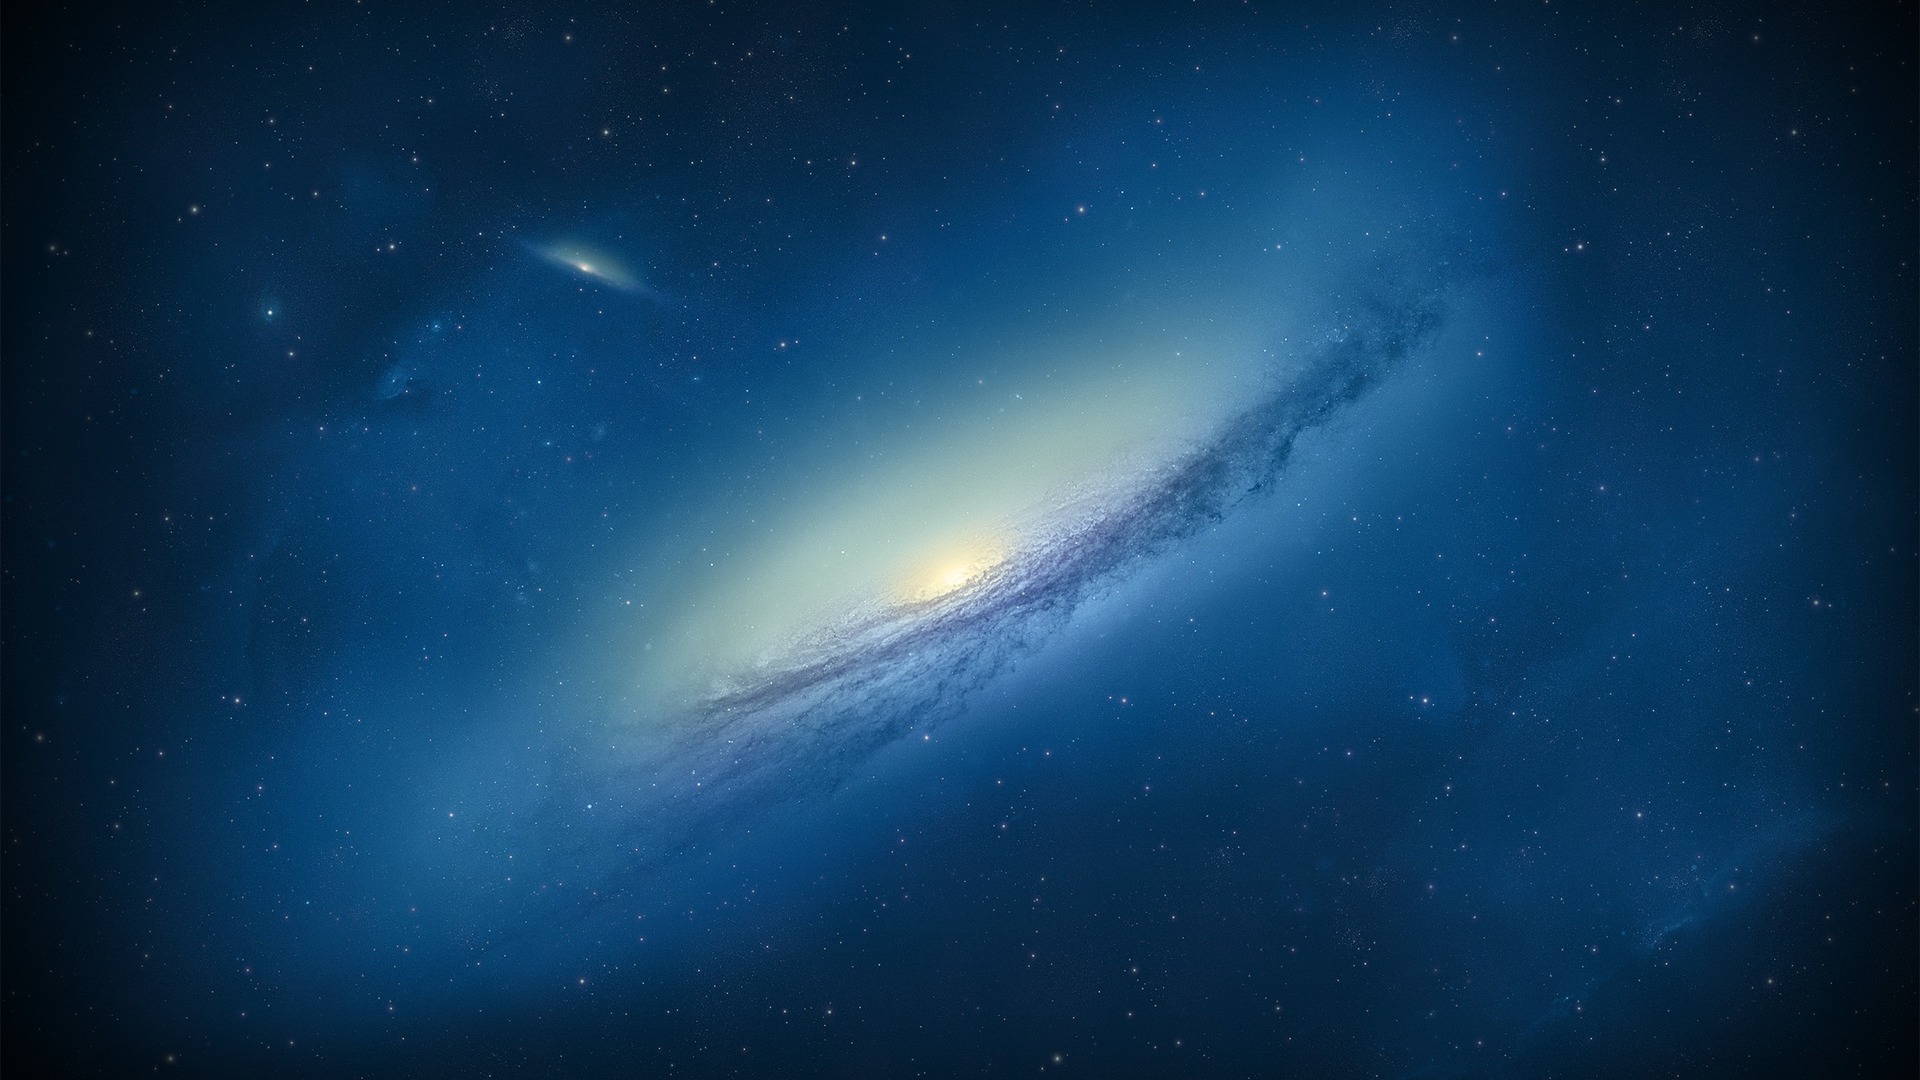 Download High quality Milky Way Galaxy Science Fiction (Sci-fi) wallpaper / 1920x1080